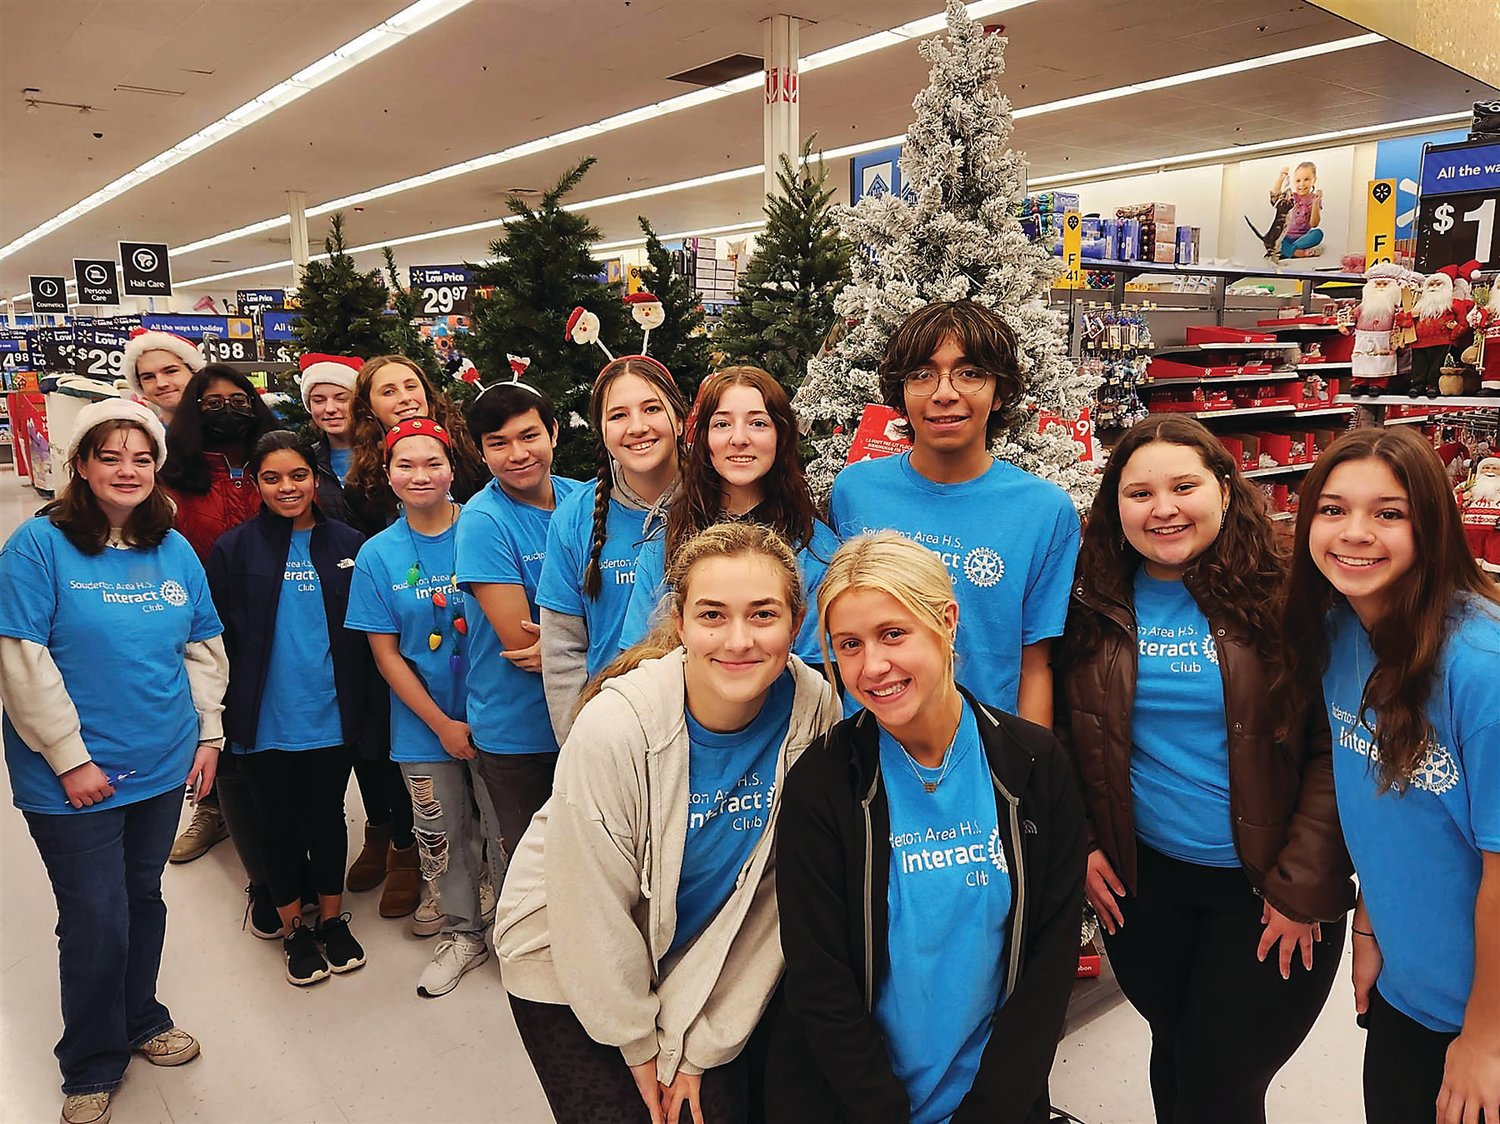 Members of the Souderton-Telford Rotary Interact Club gather to assist officers from Franconia Township, Telford, and Hatfield Police Departments in shopping with local families during the “Shop with a Cop” event.